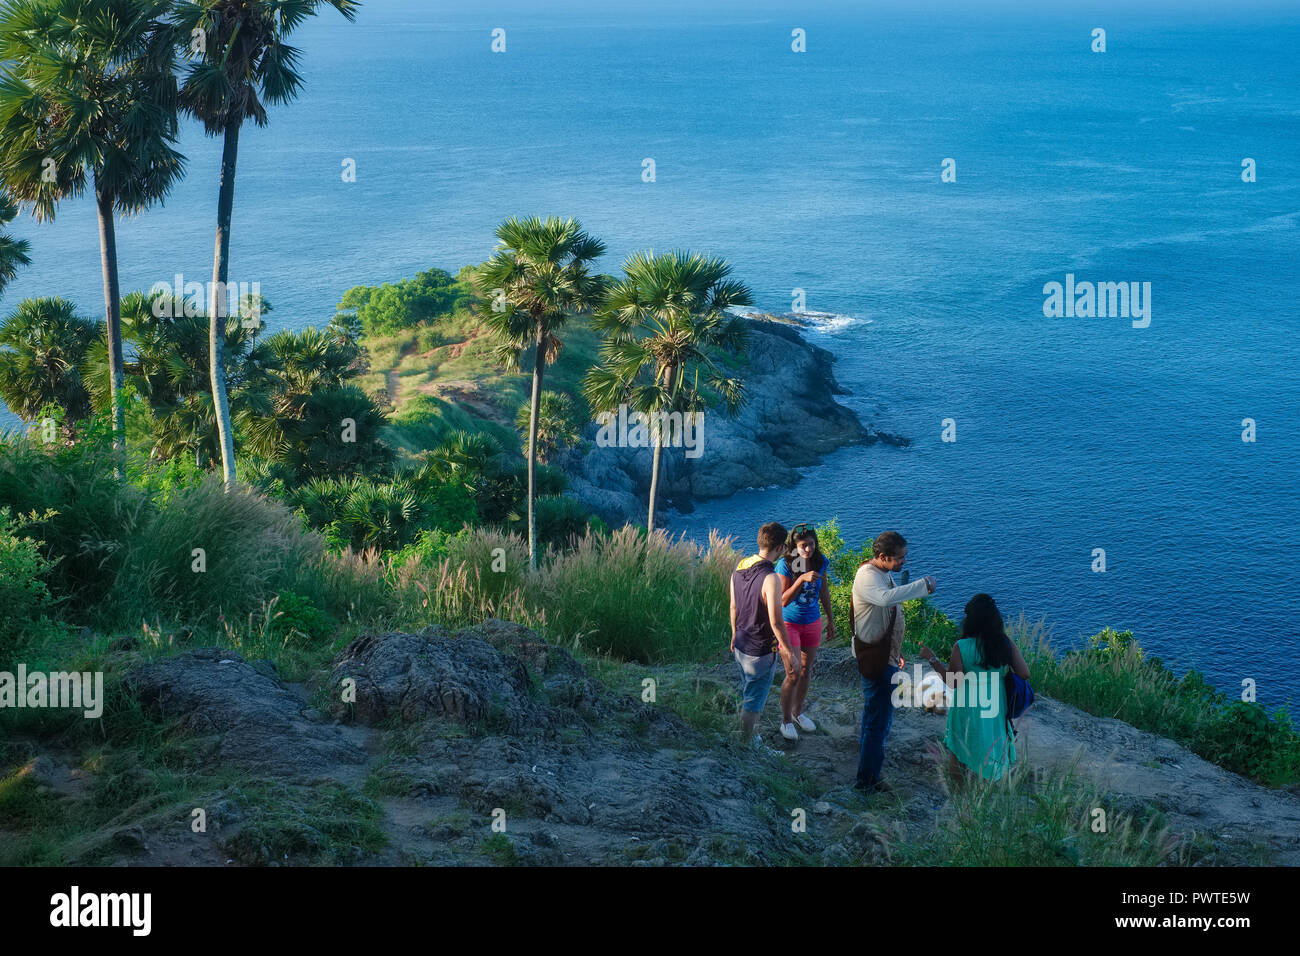 Indian tourists, on an early morning visiting Laem Phromthep or Phromthep Cape, the southernmost point on Phuket island, Thailand Stock Photo